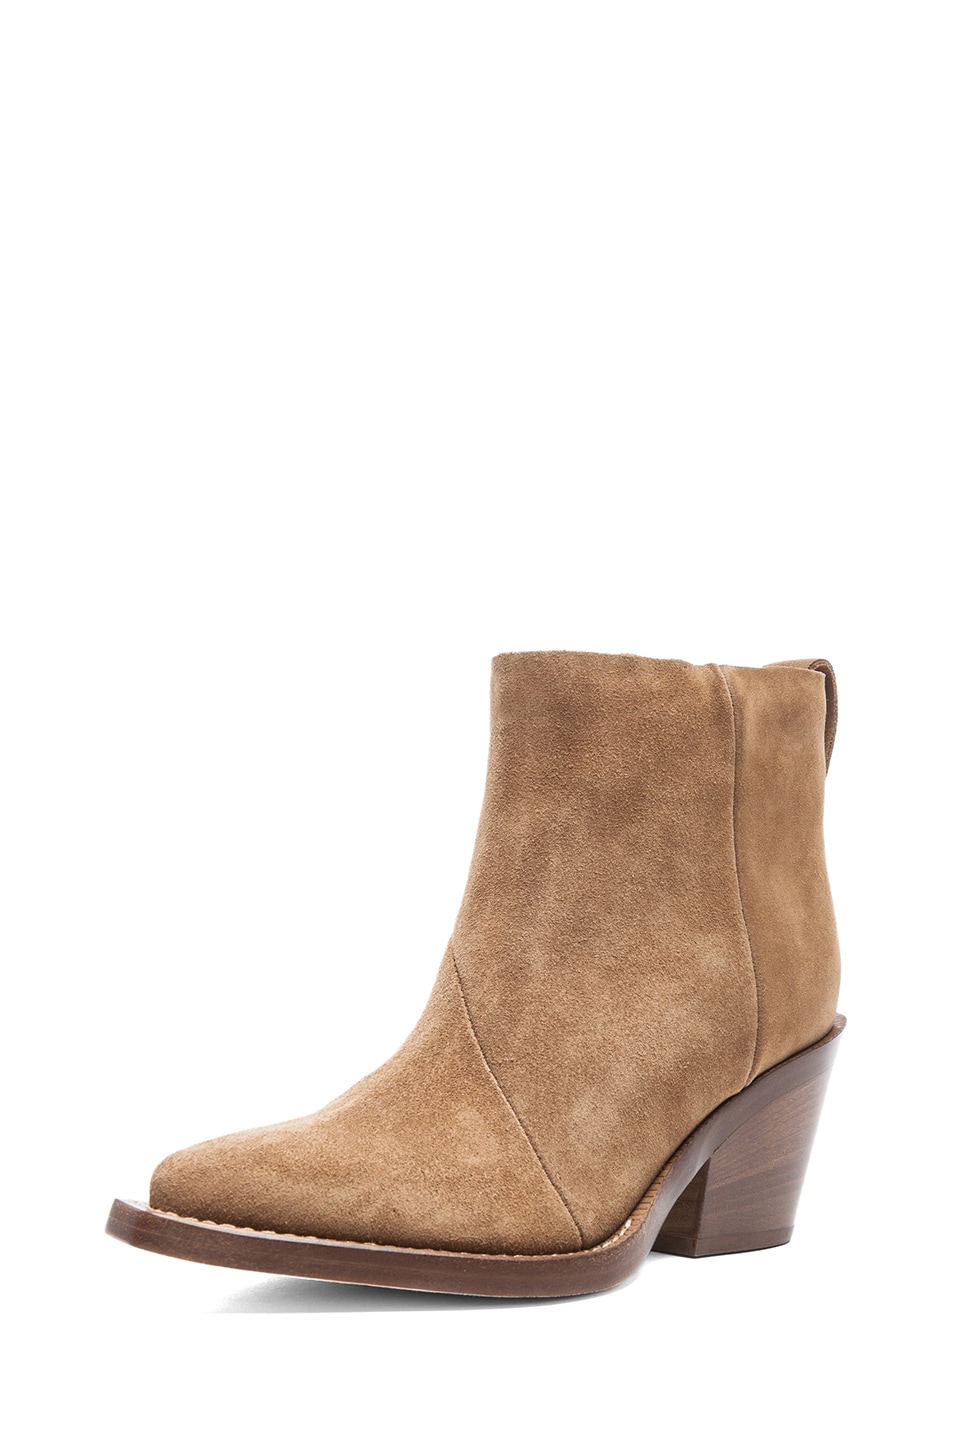 Acne Studios Donna Suede Boots in Mocca | FWRD